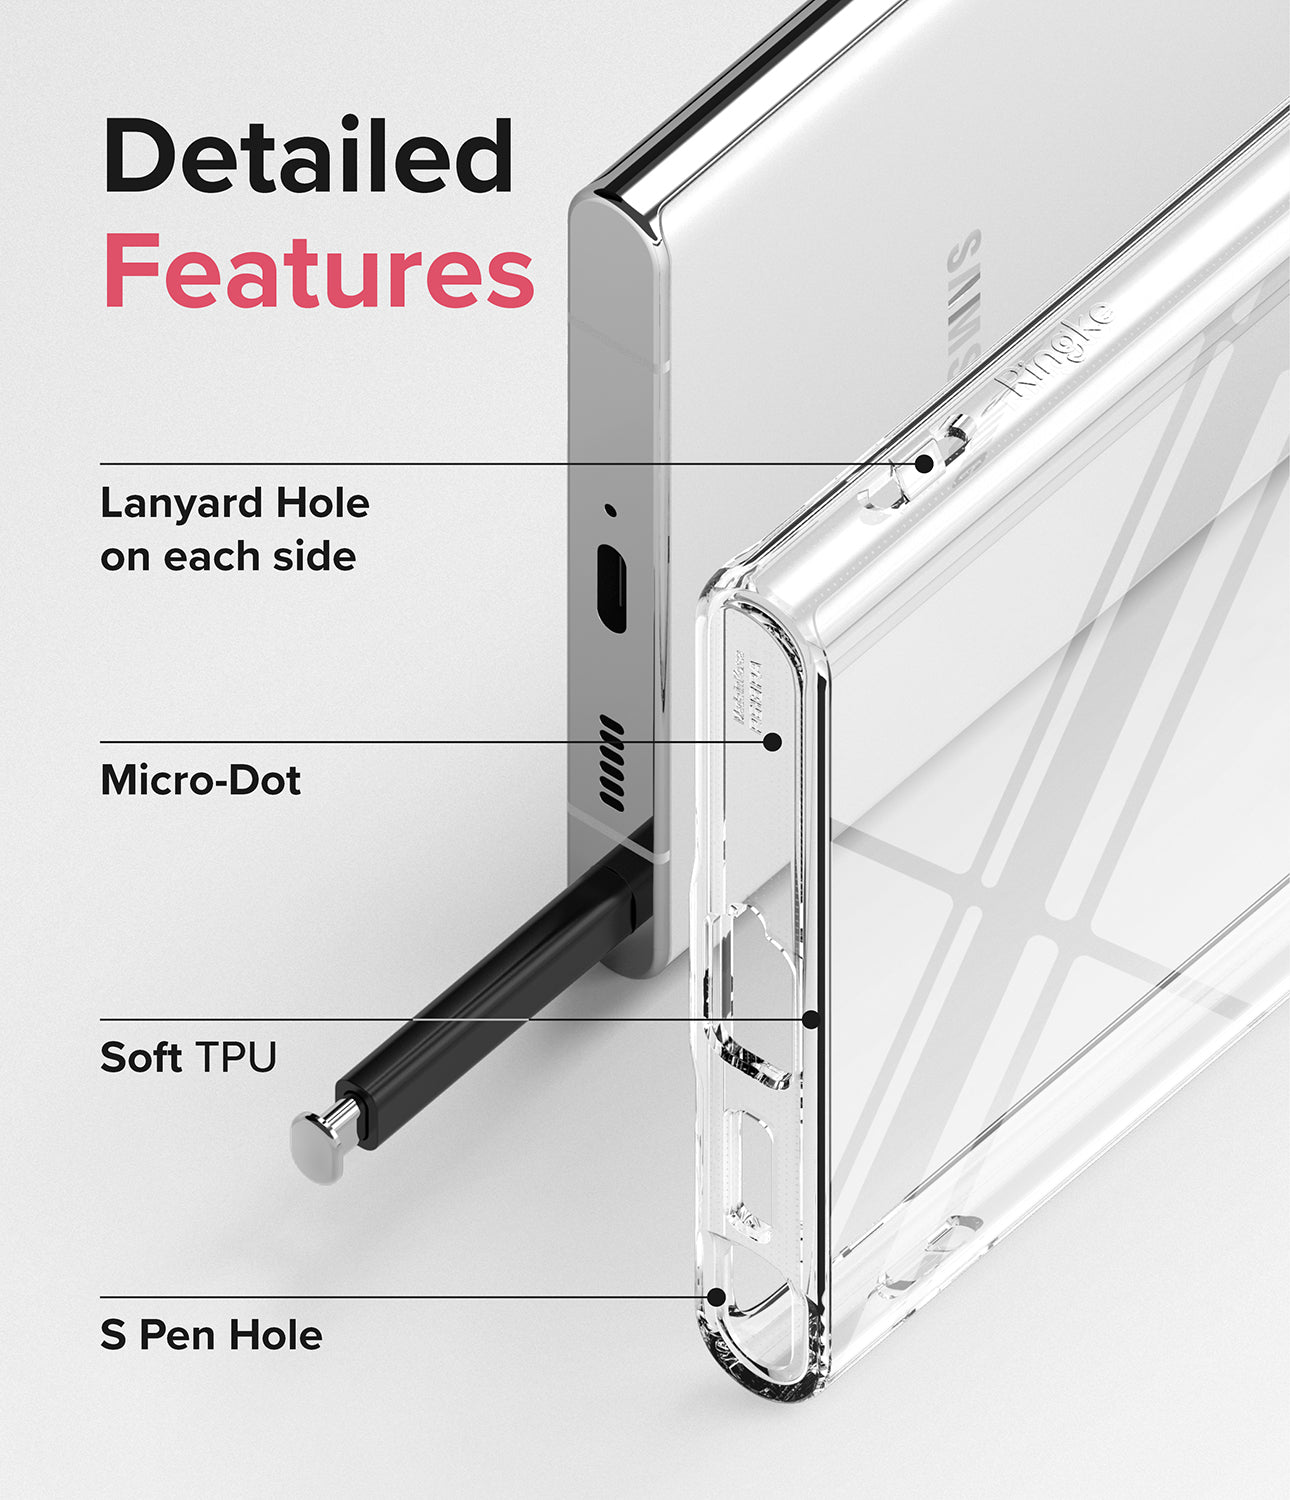 Galaxy S22 Ultra Case | Air - Clear - Detailed Features. Lanyard Hole on each side. Micro-Dot. Soft TPU. S Pen Hole.